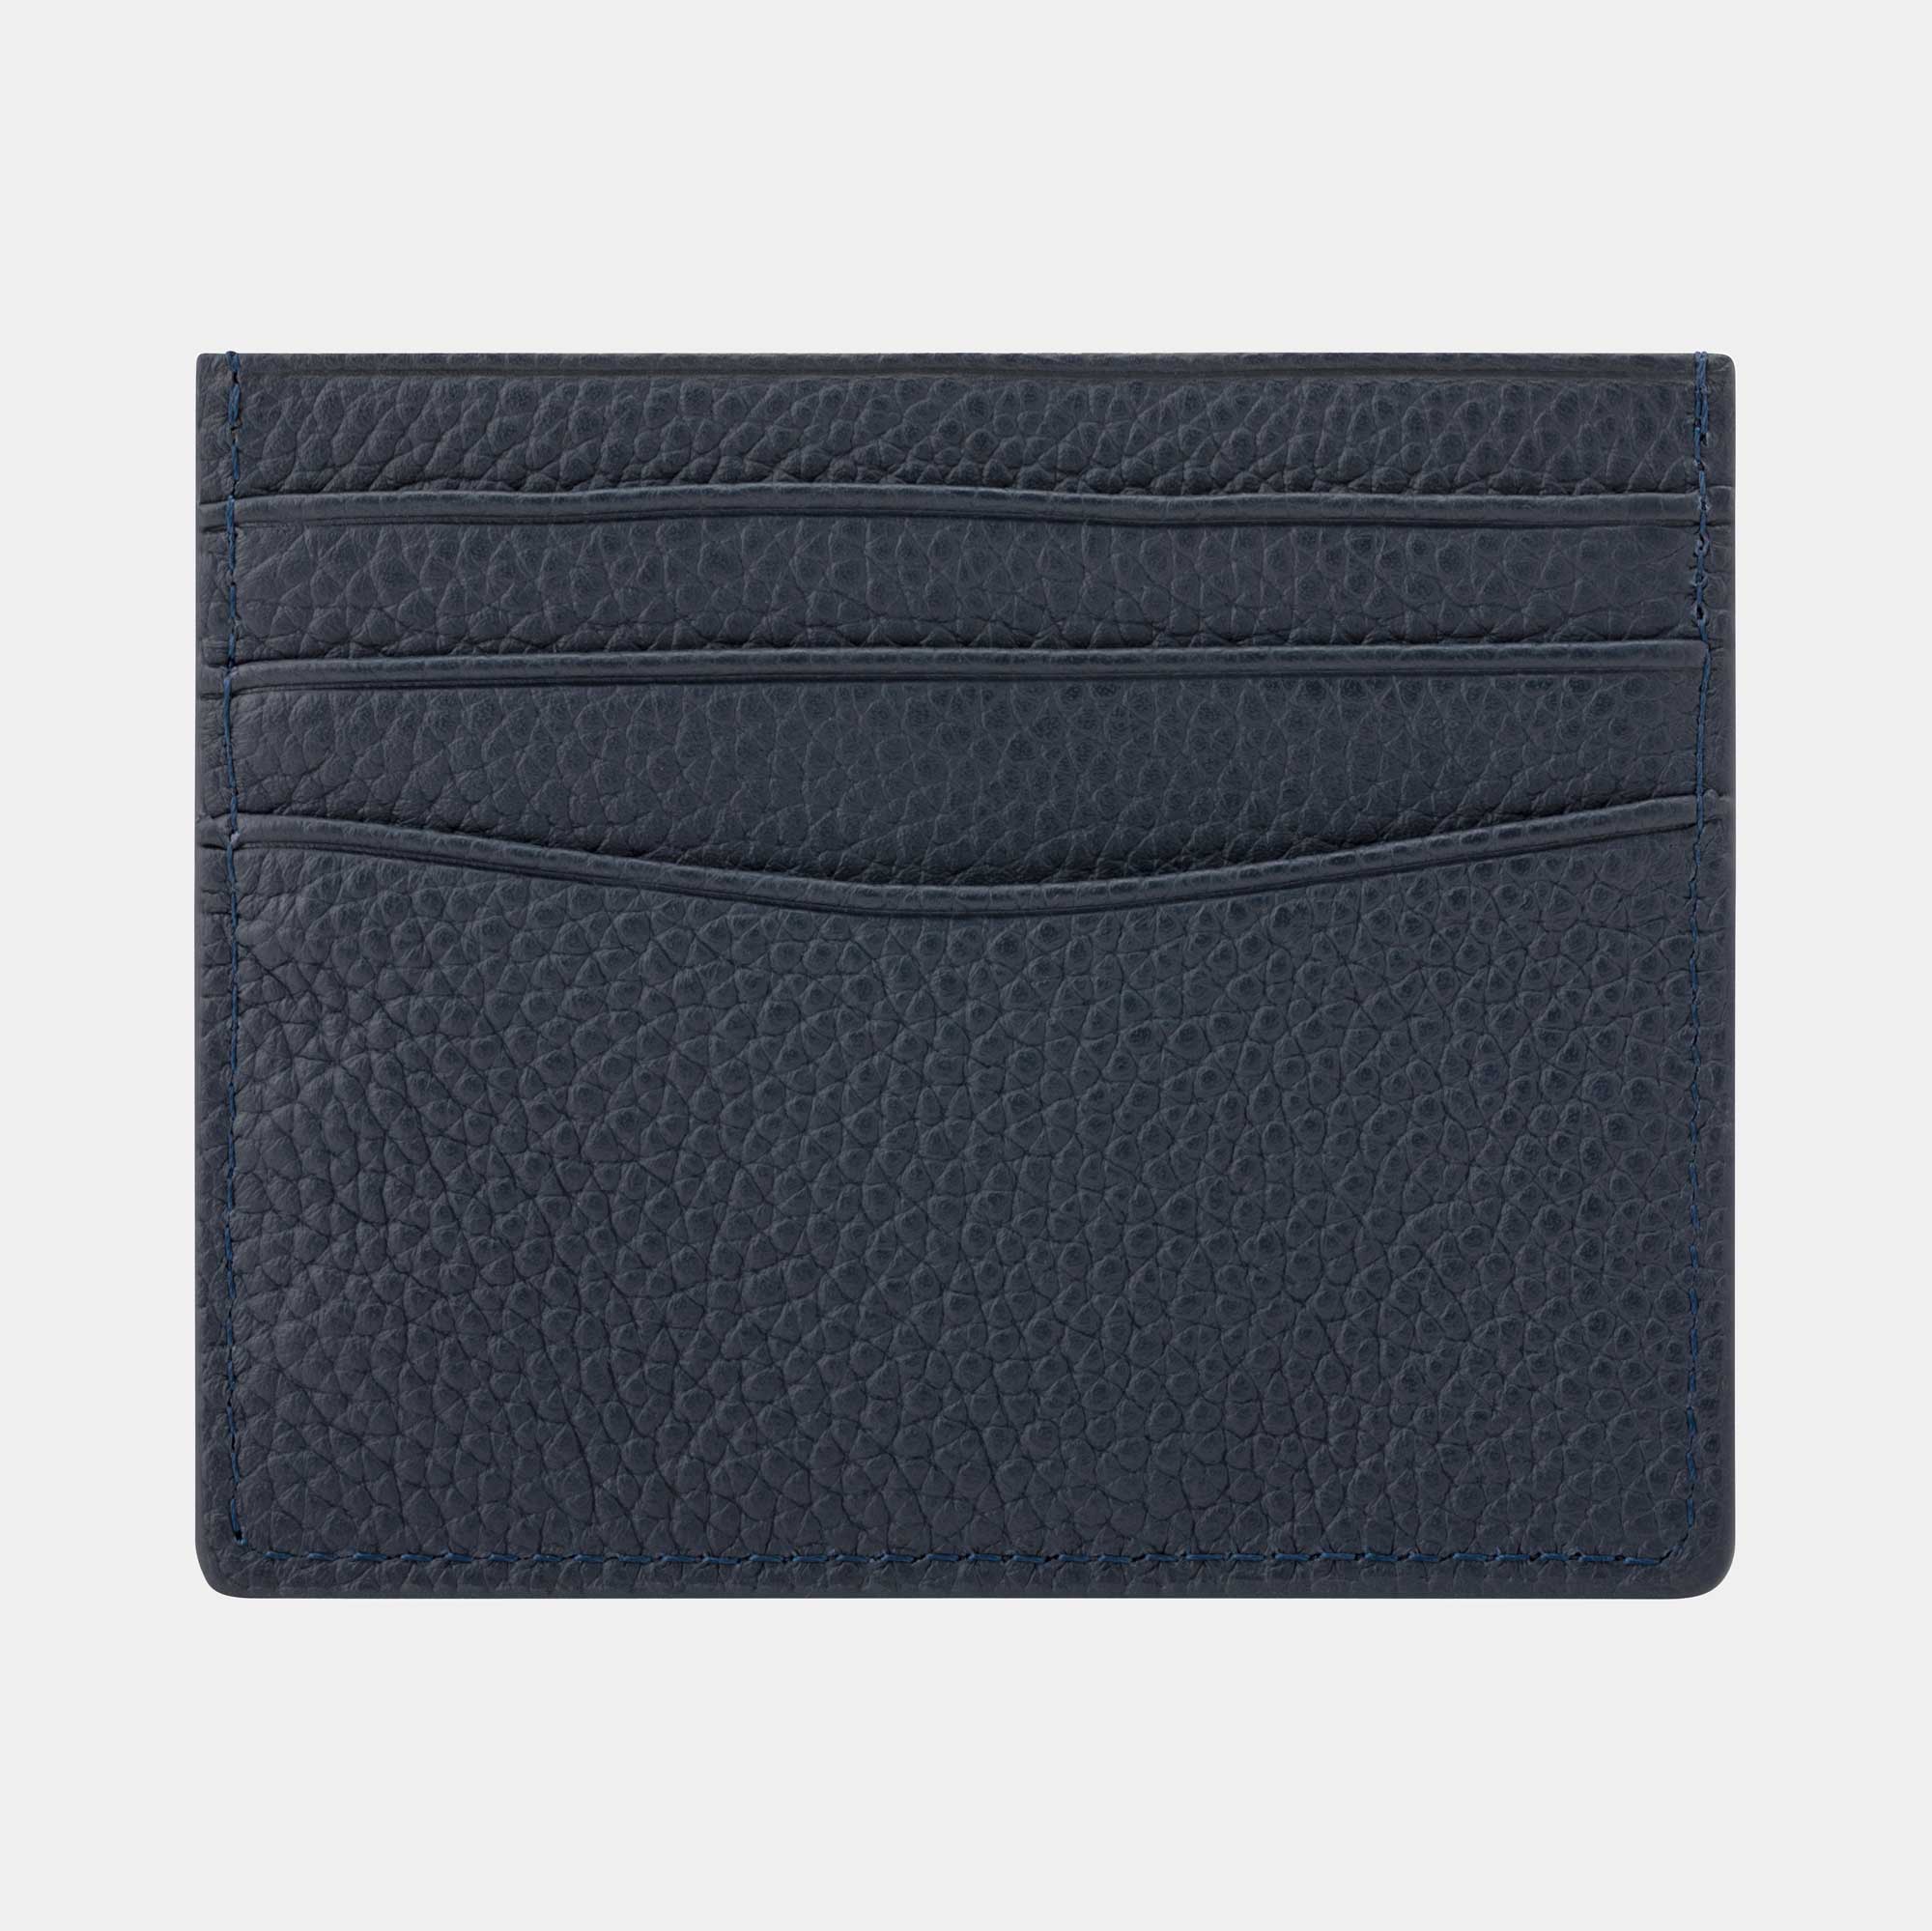 Royal Blue Leather Card Wallet - Buckle and Band - CH-6-BLU-01